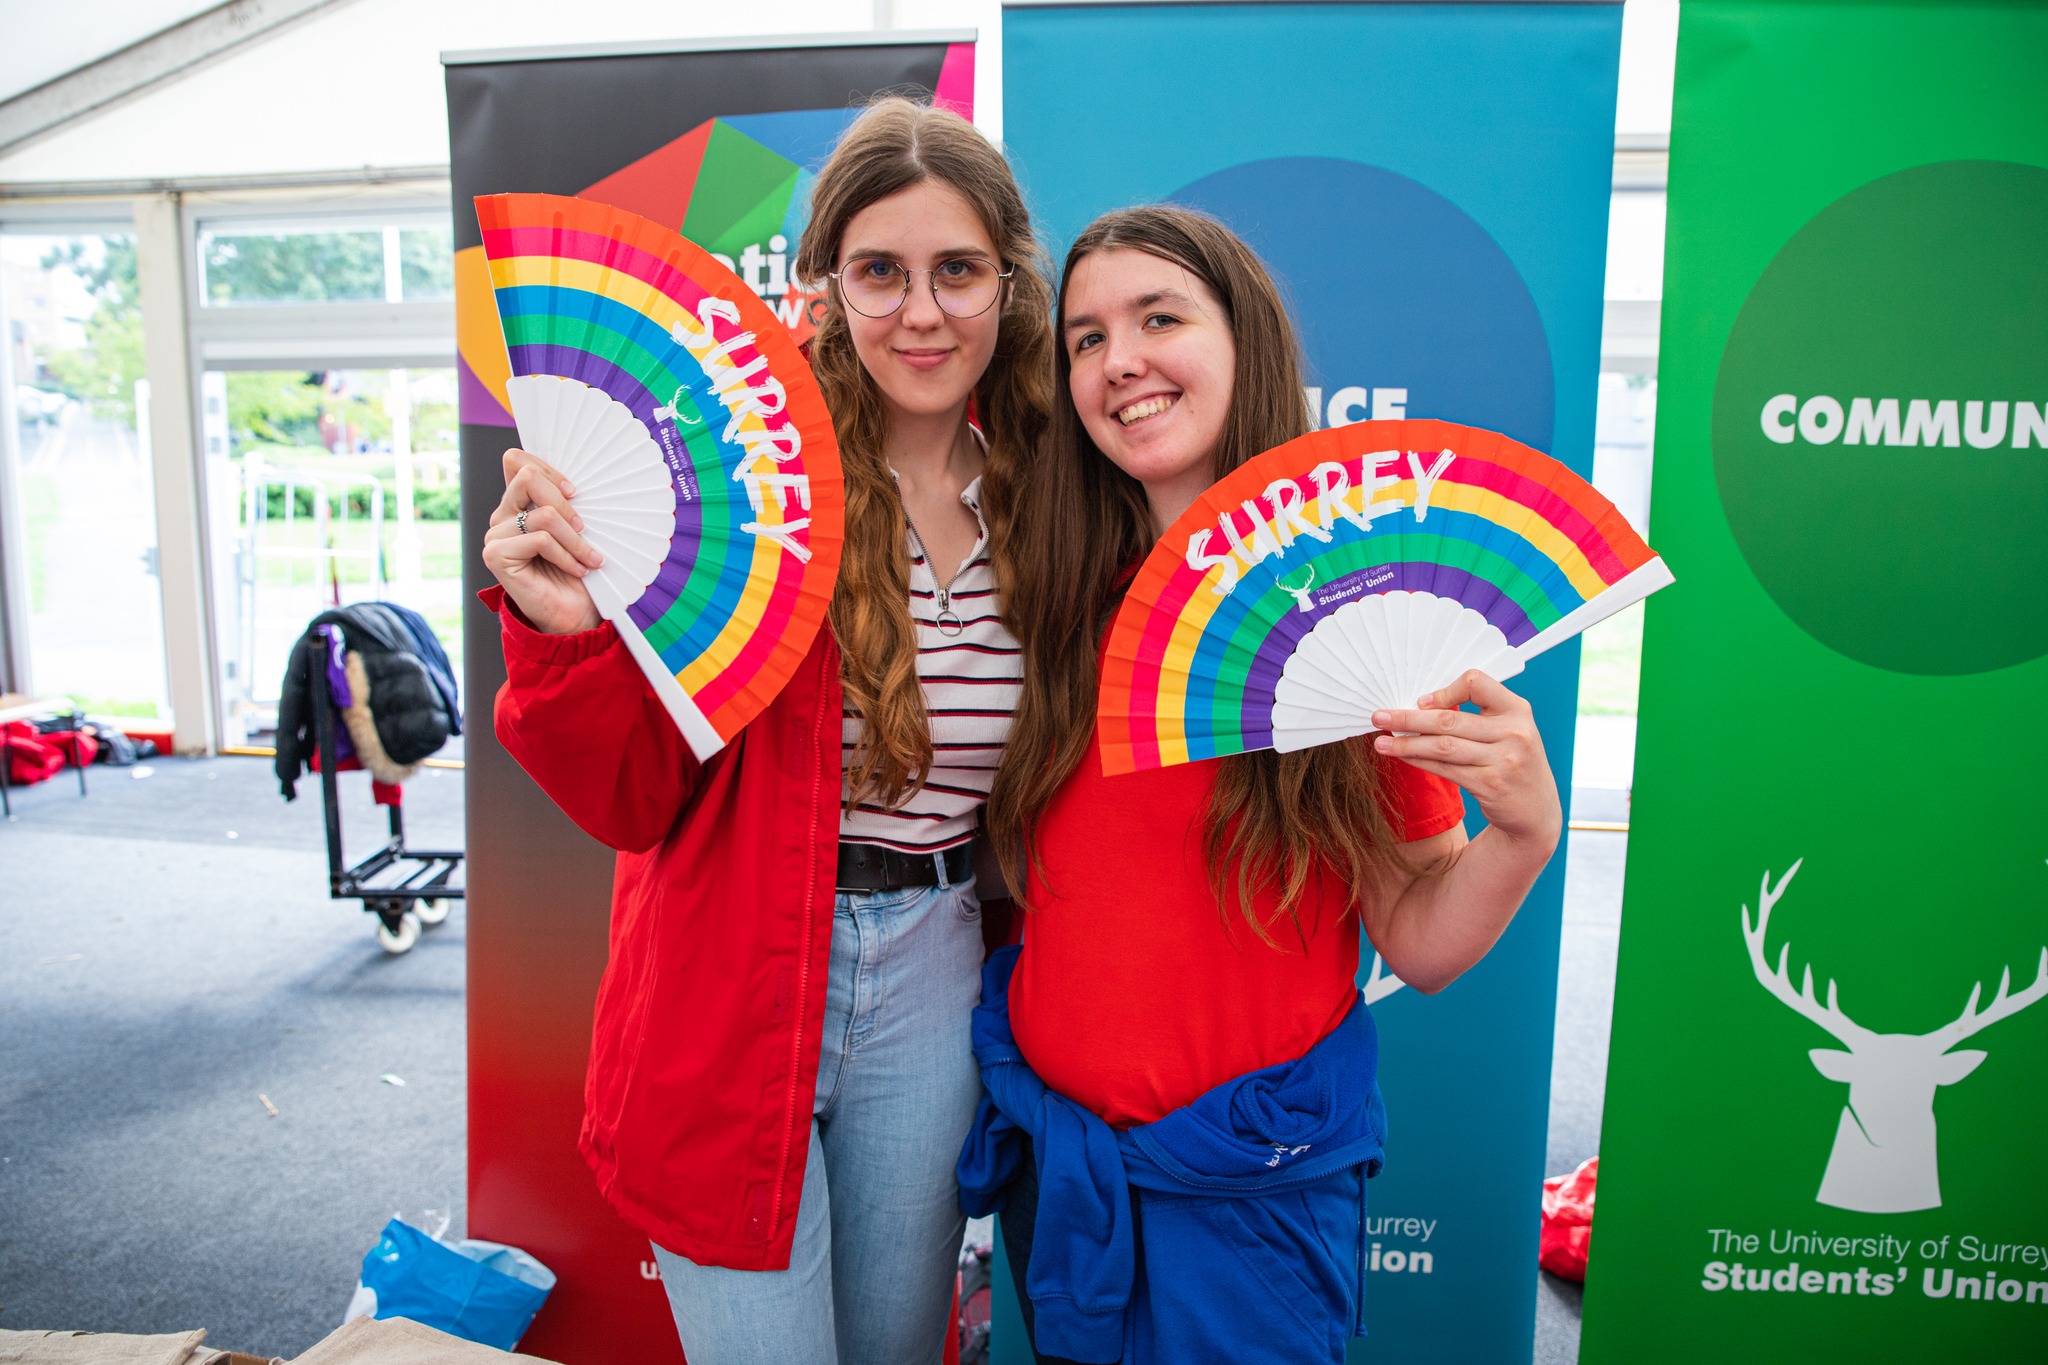 Two girls posing with rainbow-coloured fans in their hands. The girl on the left is tall and blond, with glasses, wearing white striped shirt and a red coat. The girl on the right is shorter with brown hair. She is wearing a red T-shirt.